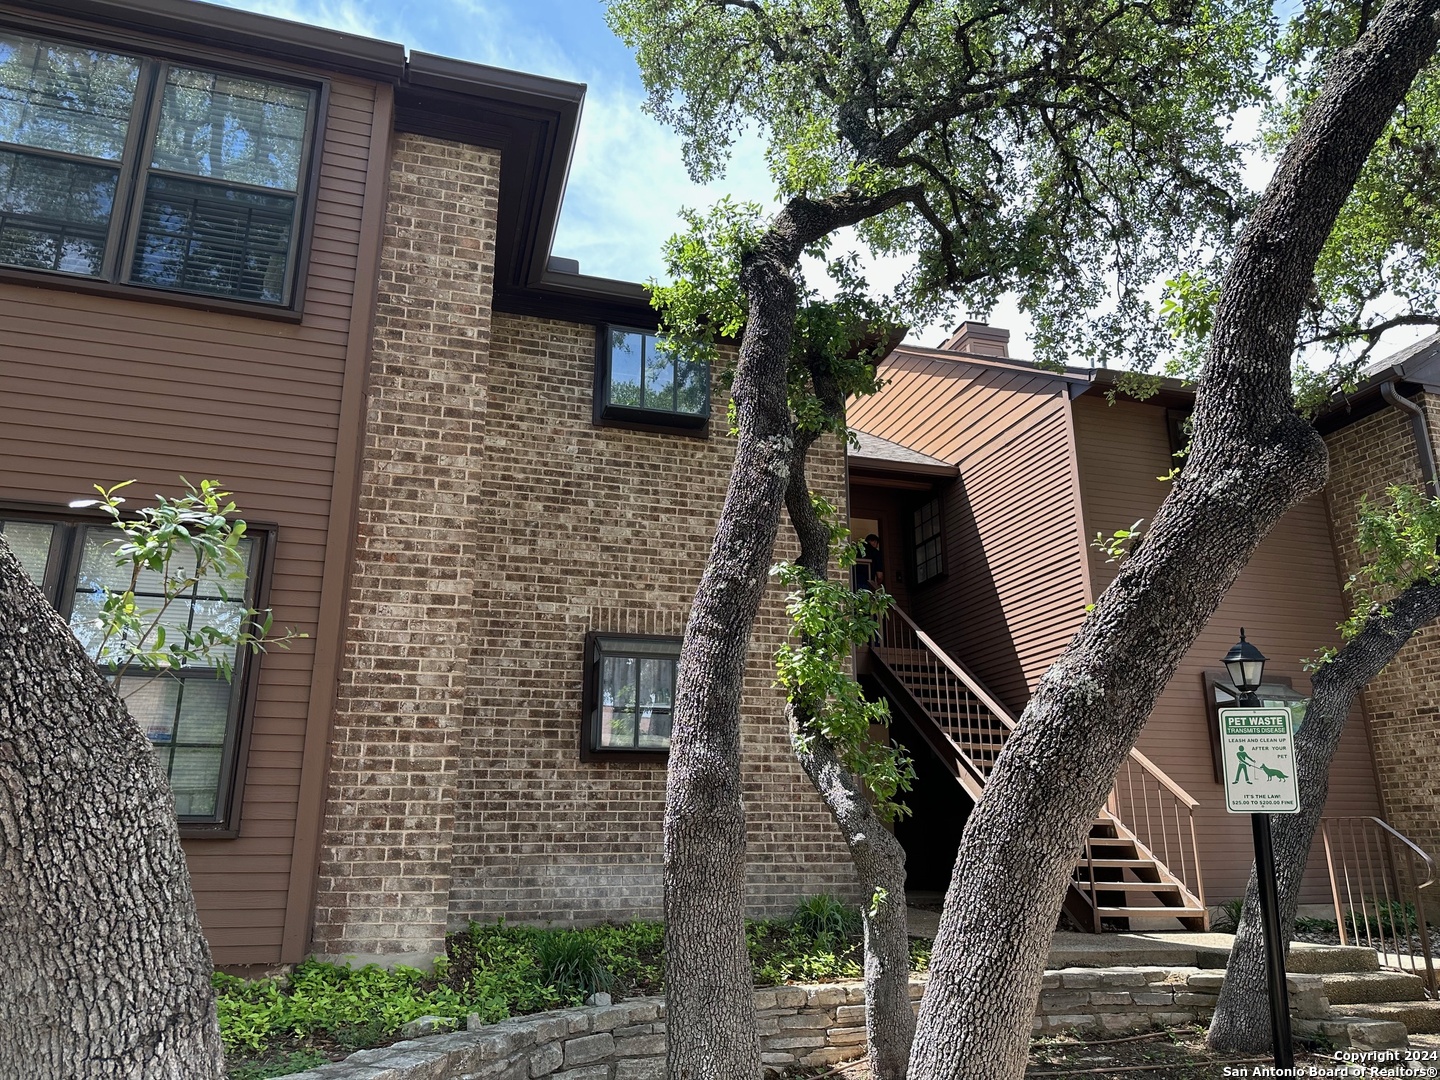 Don't miss  this Great location in the desirable '' Whisper  Hollow condominiums", recently remodeled with new  wood- laminate flooring throughout. 2 -bedroom / 2-bathroom,new appliances ,granite countertops ,new celling fans and blinds etc ! covered balcony with view of pool  and trees. Easy access to  IH-10, Close to USAA & MED center. The  community amenities include well-groomed landscaping with many mature oak trees, large swimming pool with Jacuzzi, tennis courts & clubhouse. HOA $314/ month for six months then goes up to  $390 for six months to cover the HOA insurance, water & trash  services are included! please  come to  see  today!